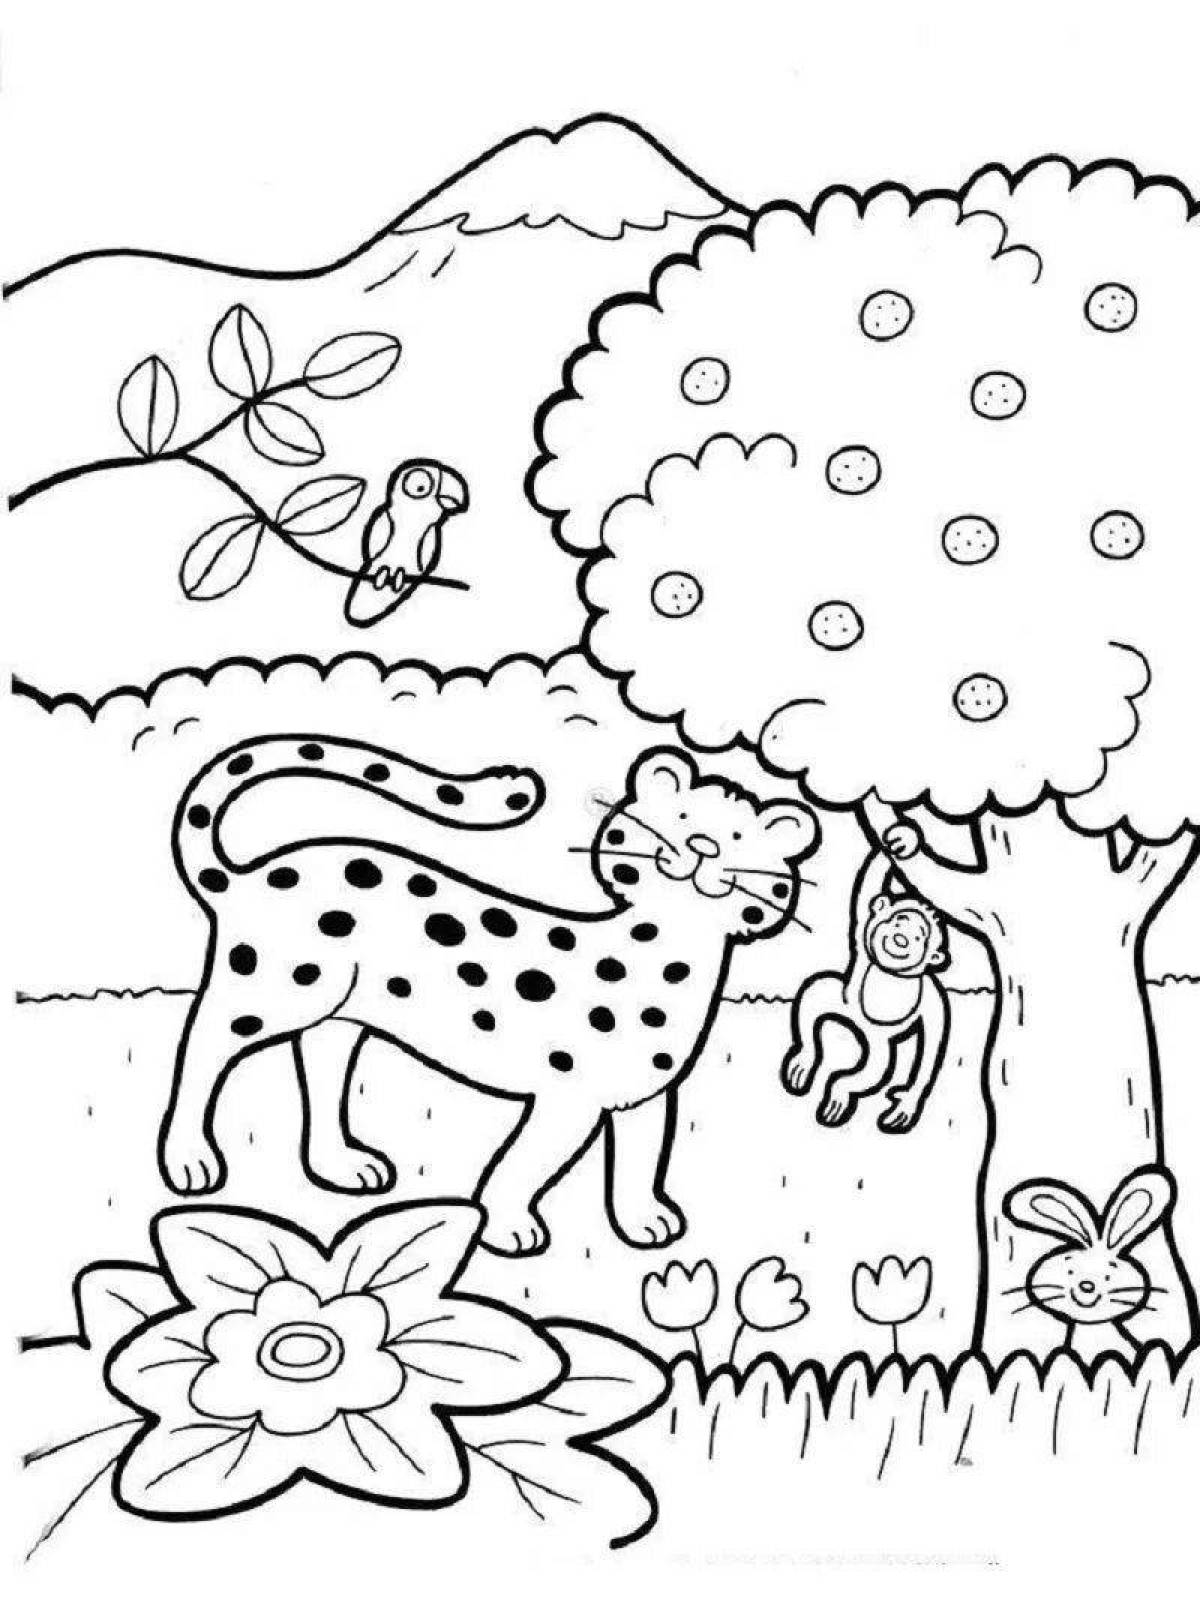 Coloring page miraculous creation of the world